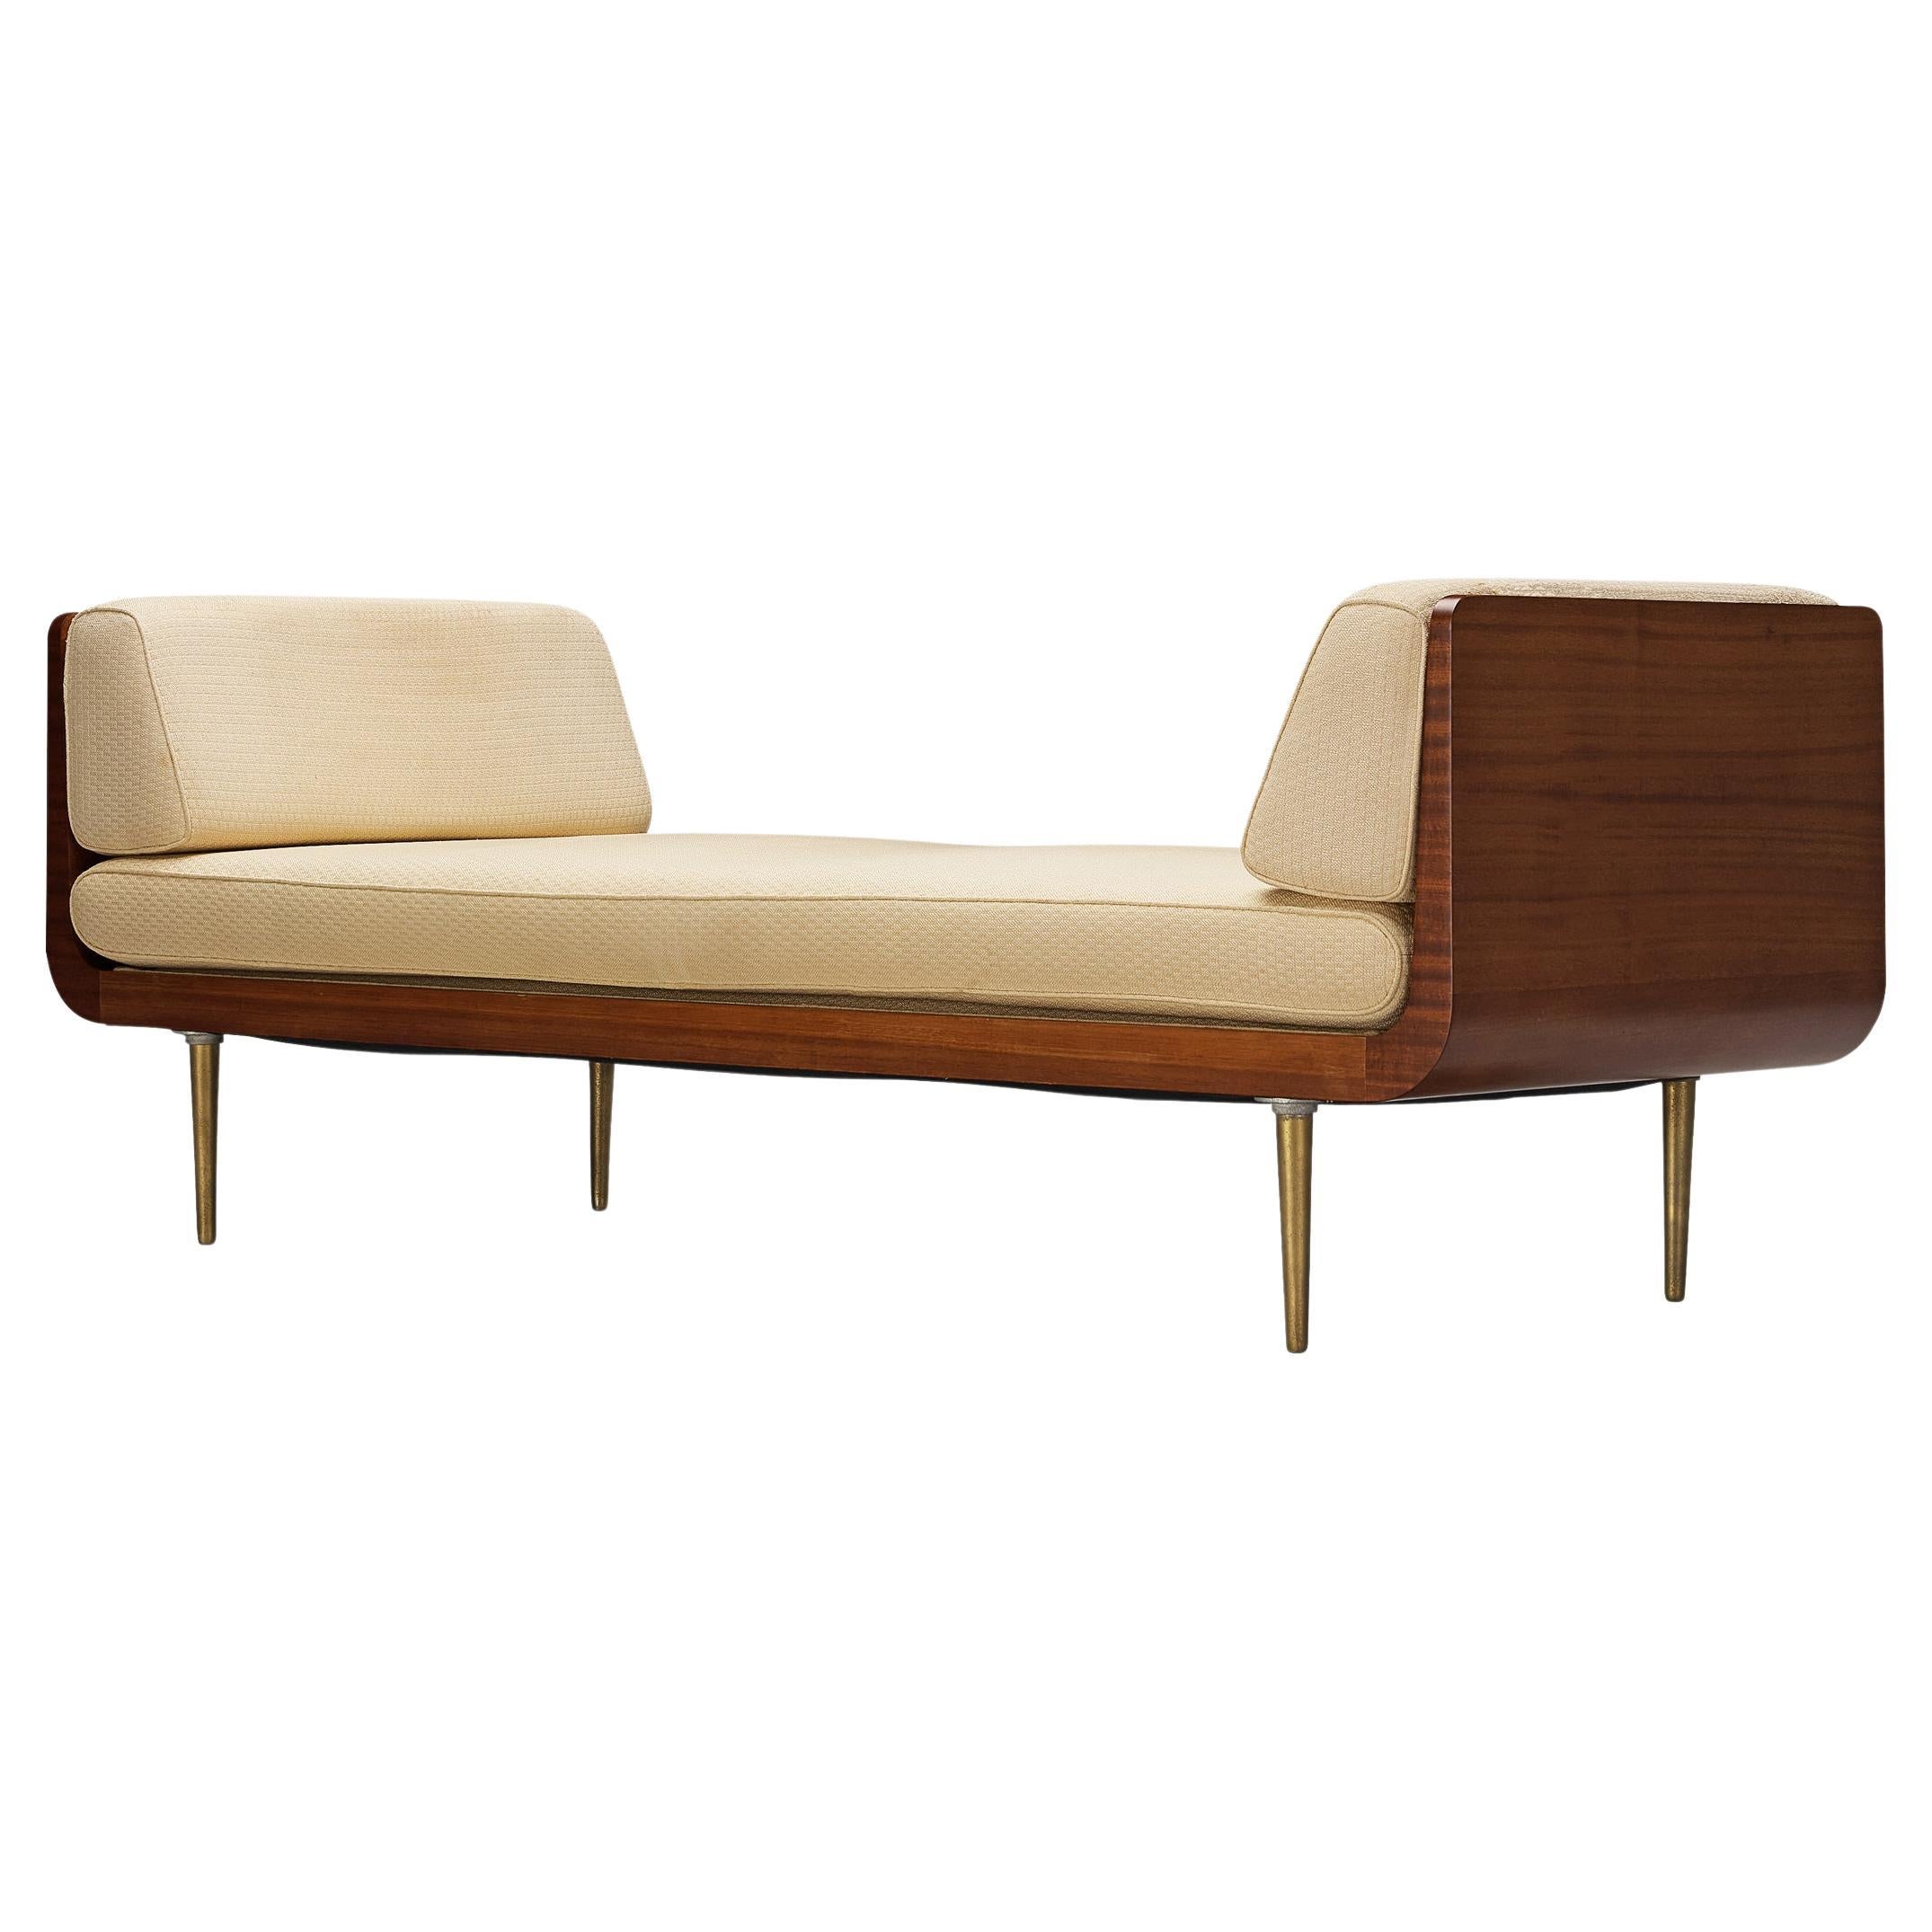 Edward Wormley Daybed in Mahogany and Beige Upholstery  For Sale